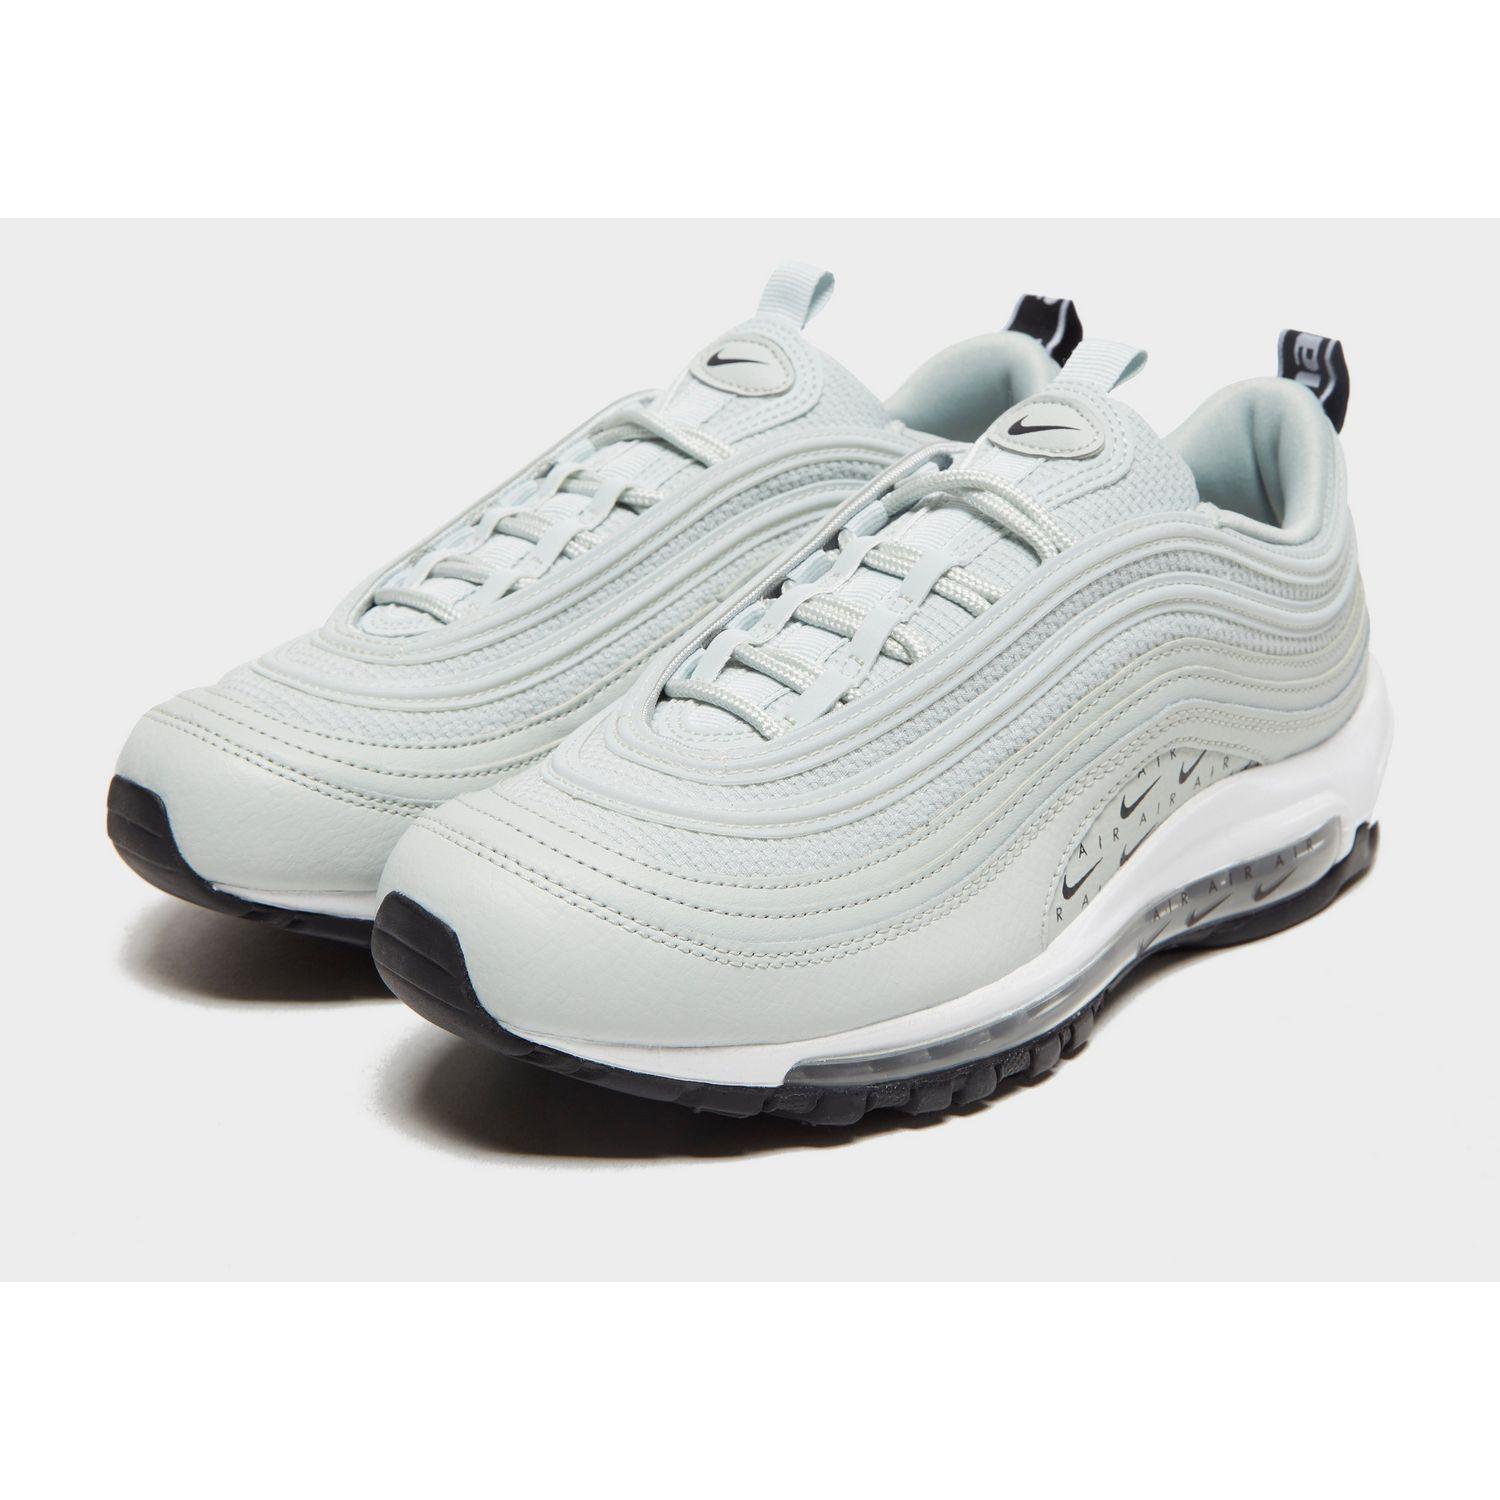 Nike Leather Air Max 97 Lx Overbranded Shoe in Silver (Metallic) - Lyst